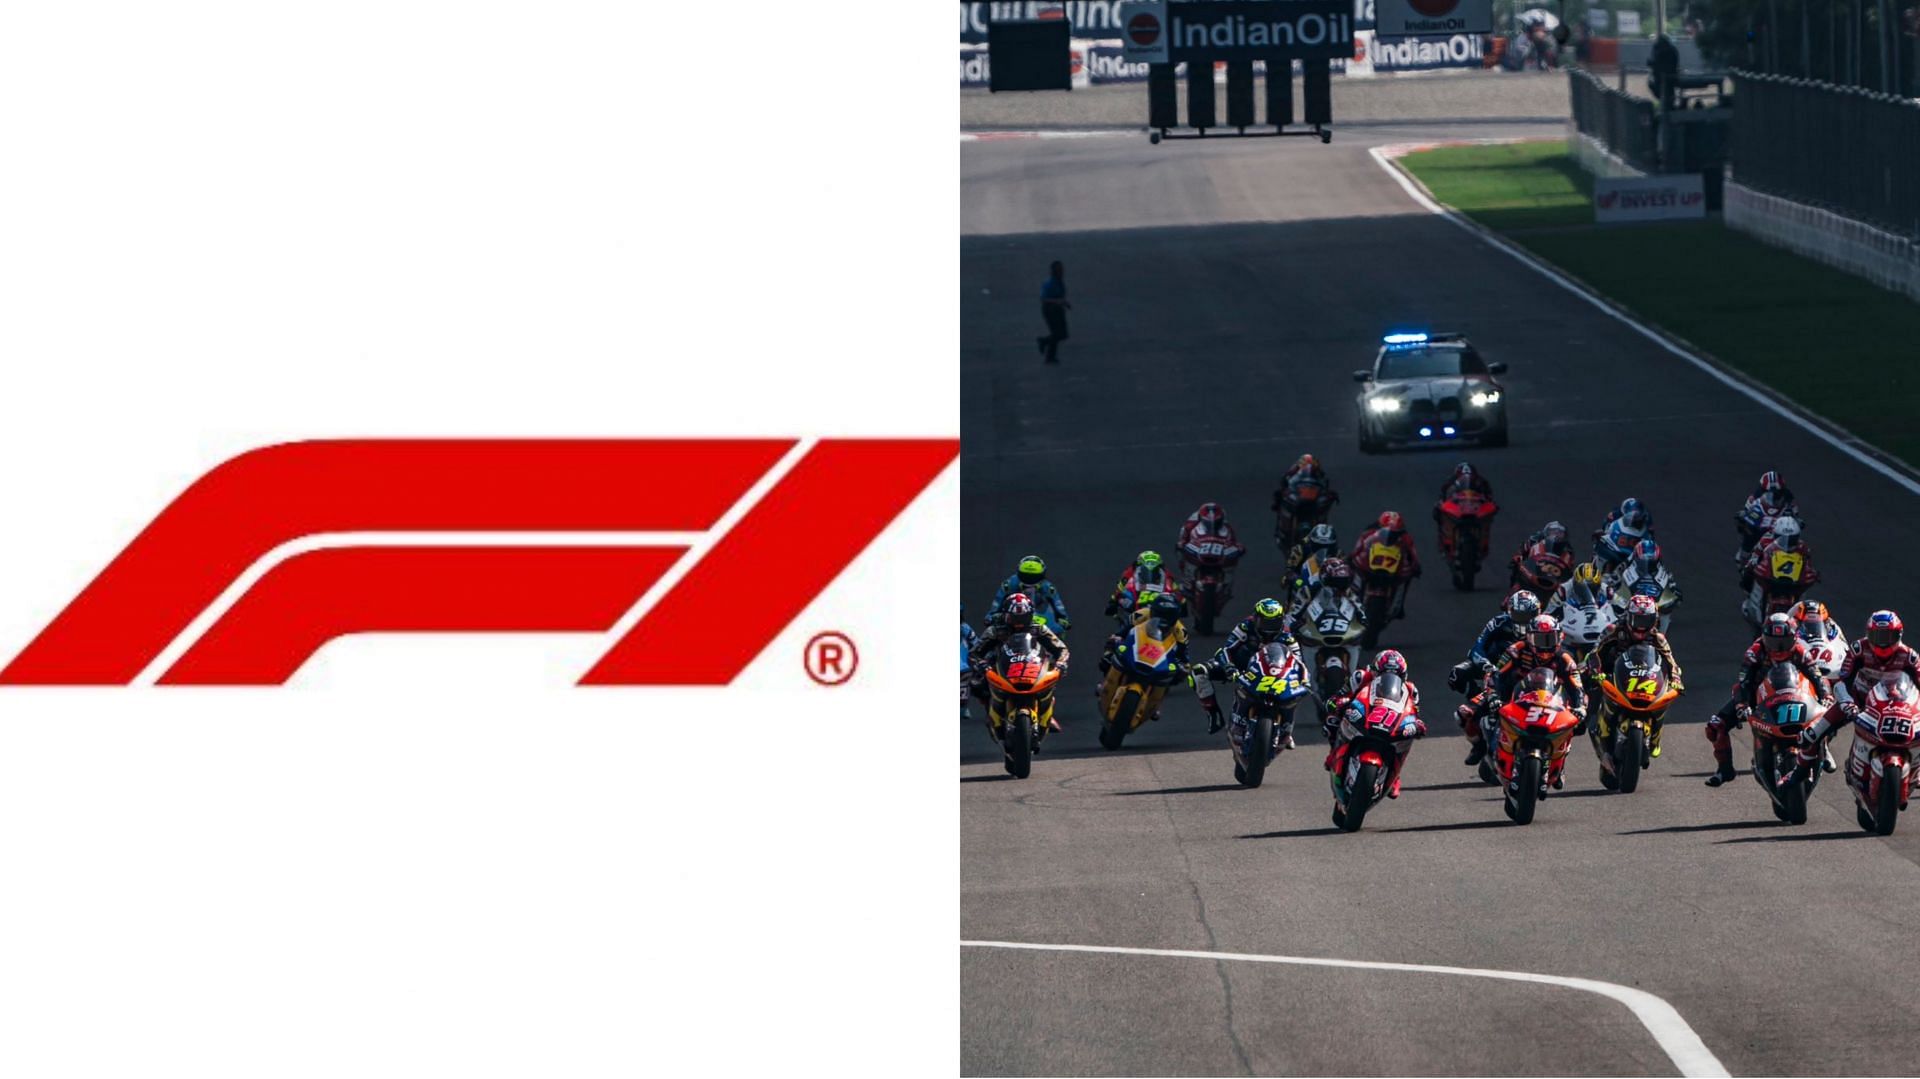 A glimpse of the starting grid at the Indian GP at Buddh International Circuit in India